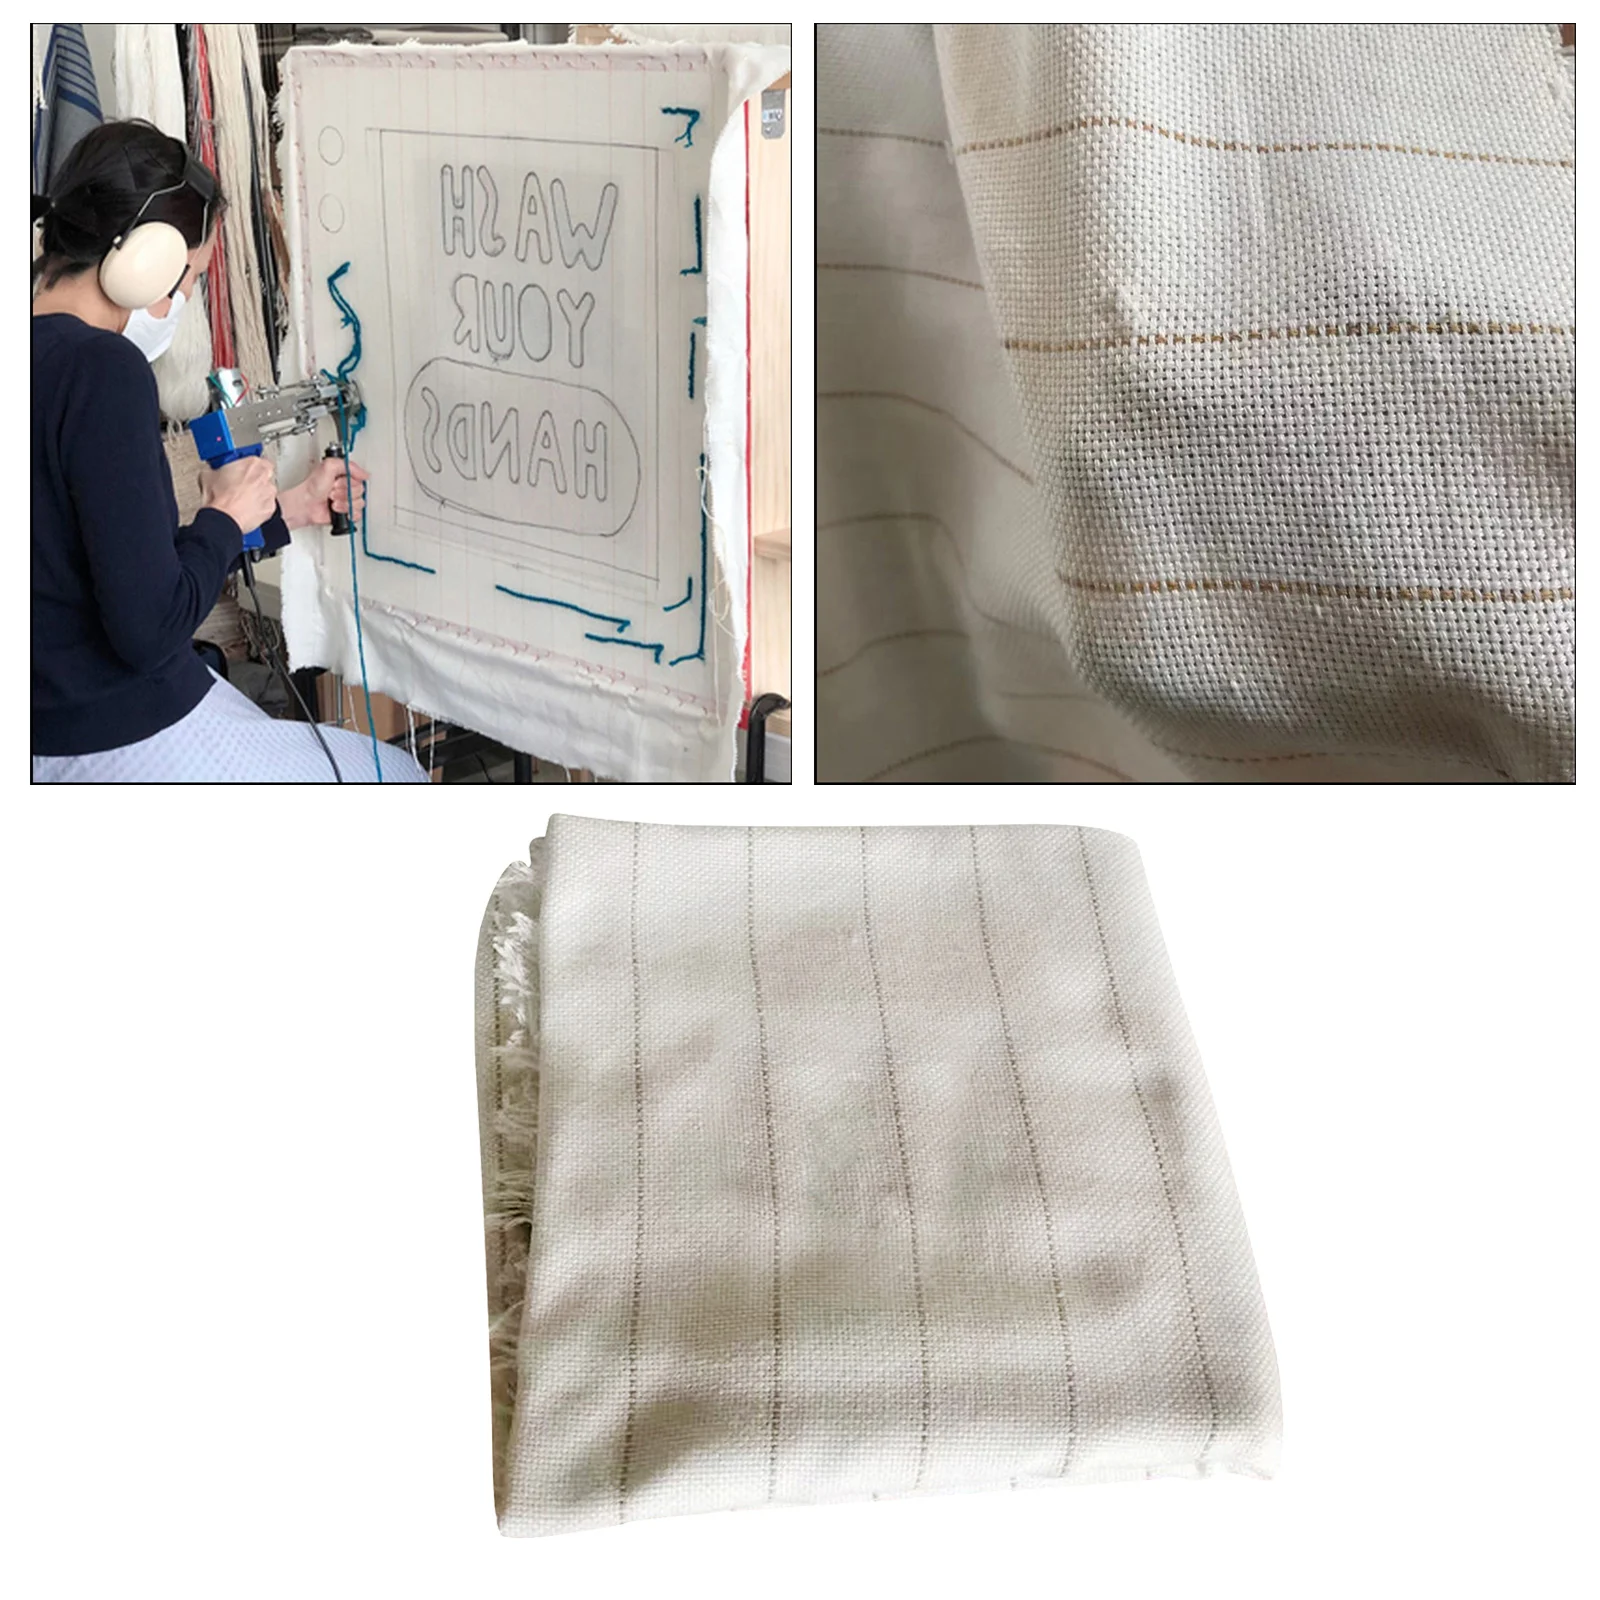 Primary Tufting Cloth with Marked Lines Needlework Fabric Monk's Cloth for Tufting Gun, Rug-Punch, Punch Needle, Tuft The Word